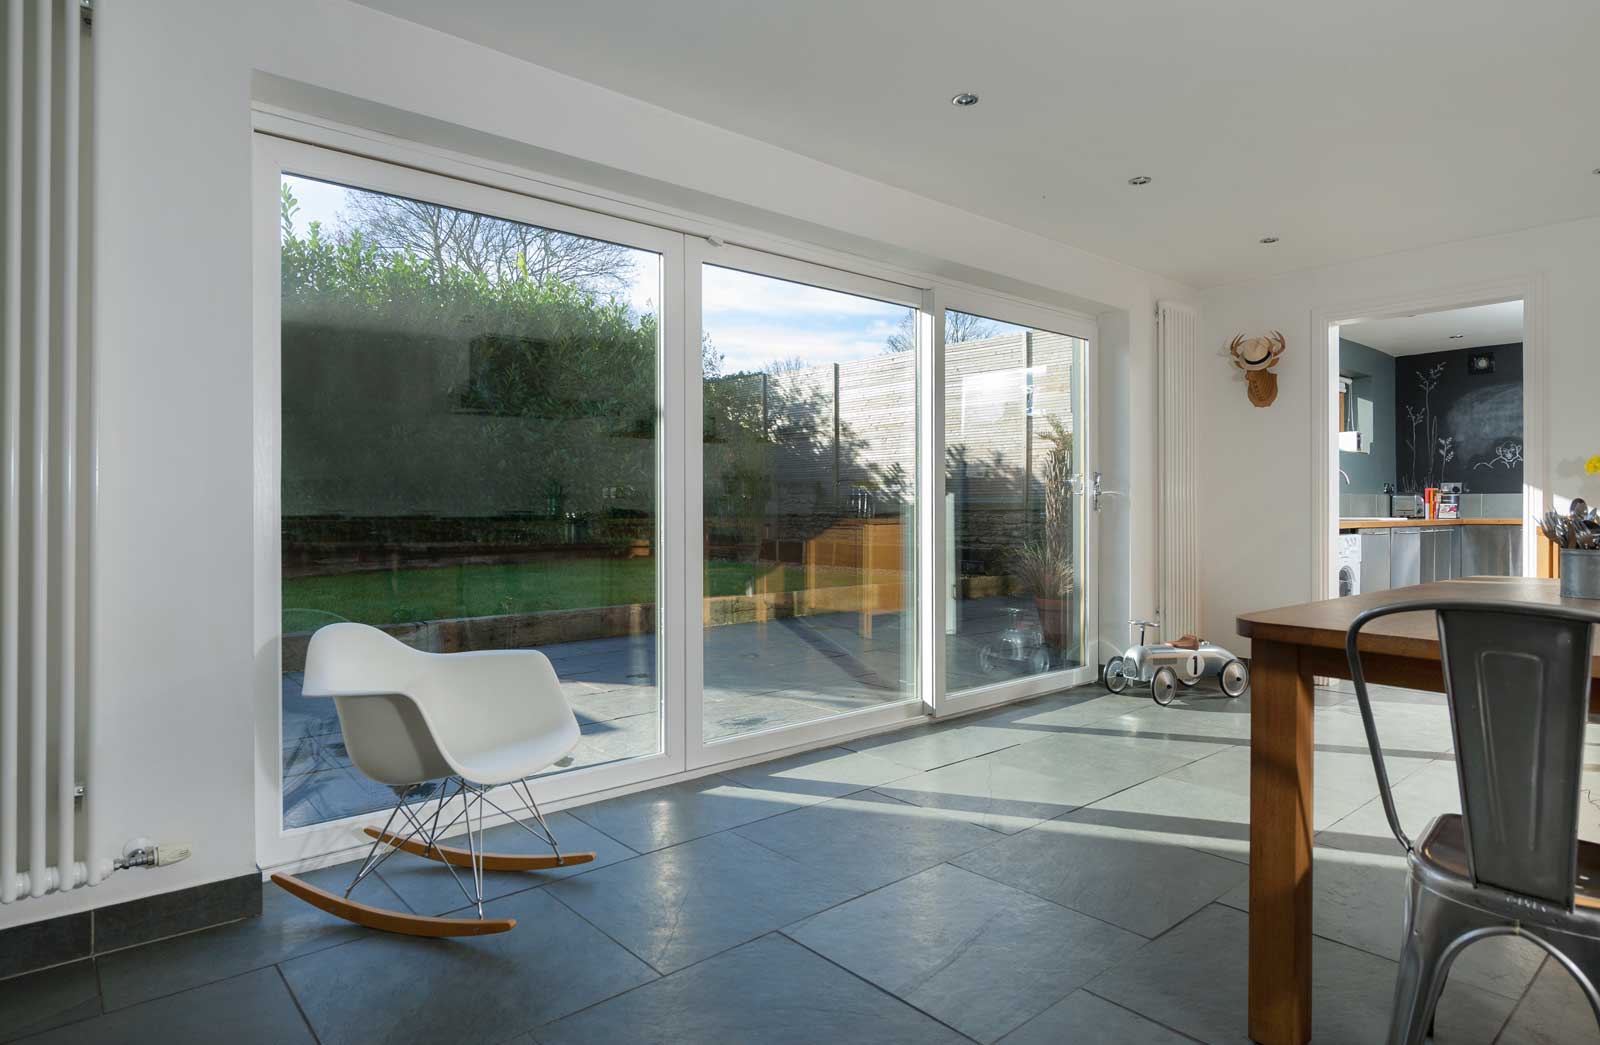 Patio Sliders by Deceuninck White patio sliding doors in a dining room